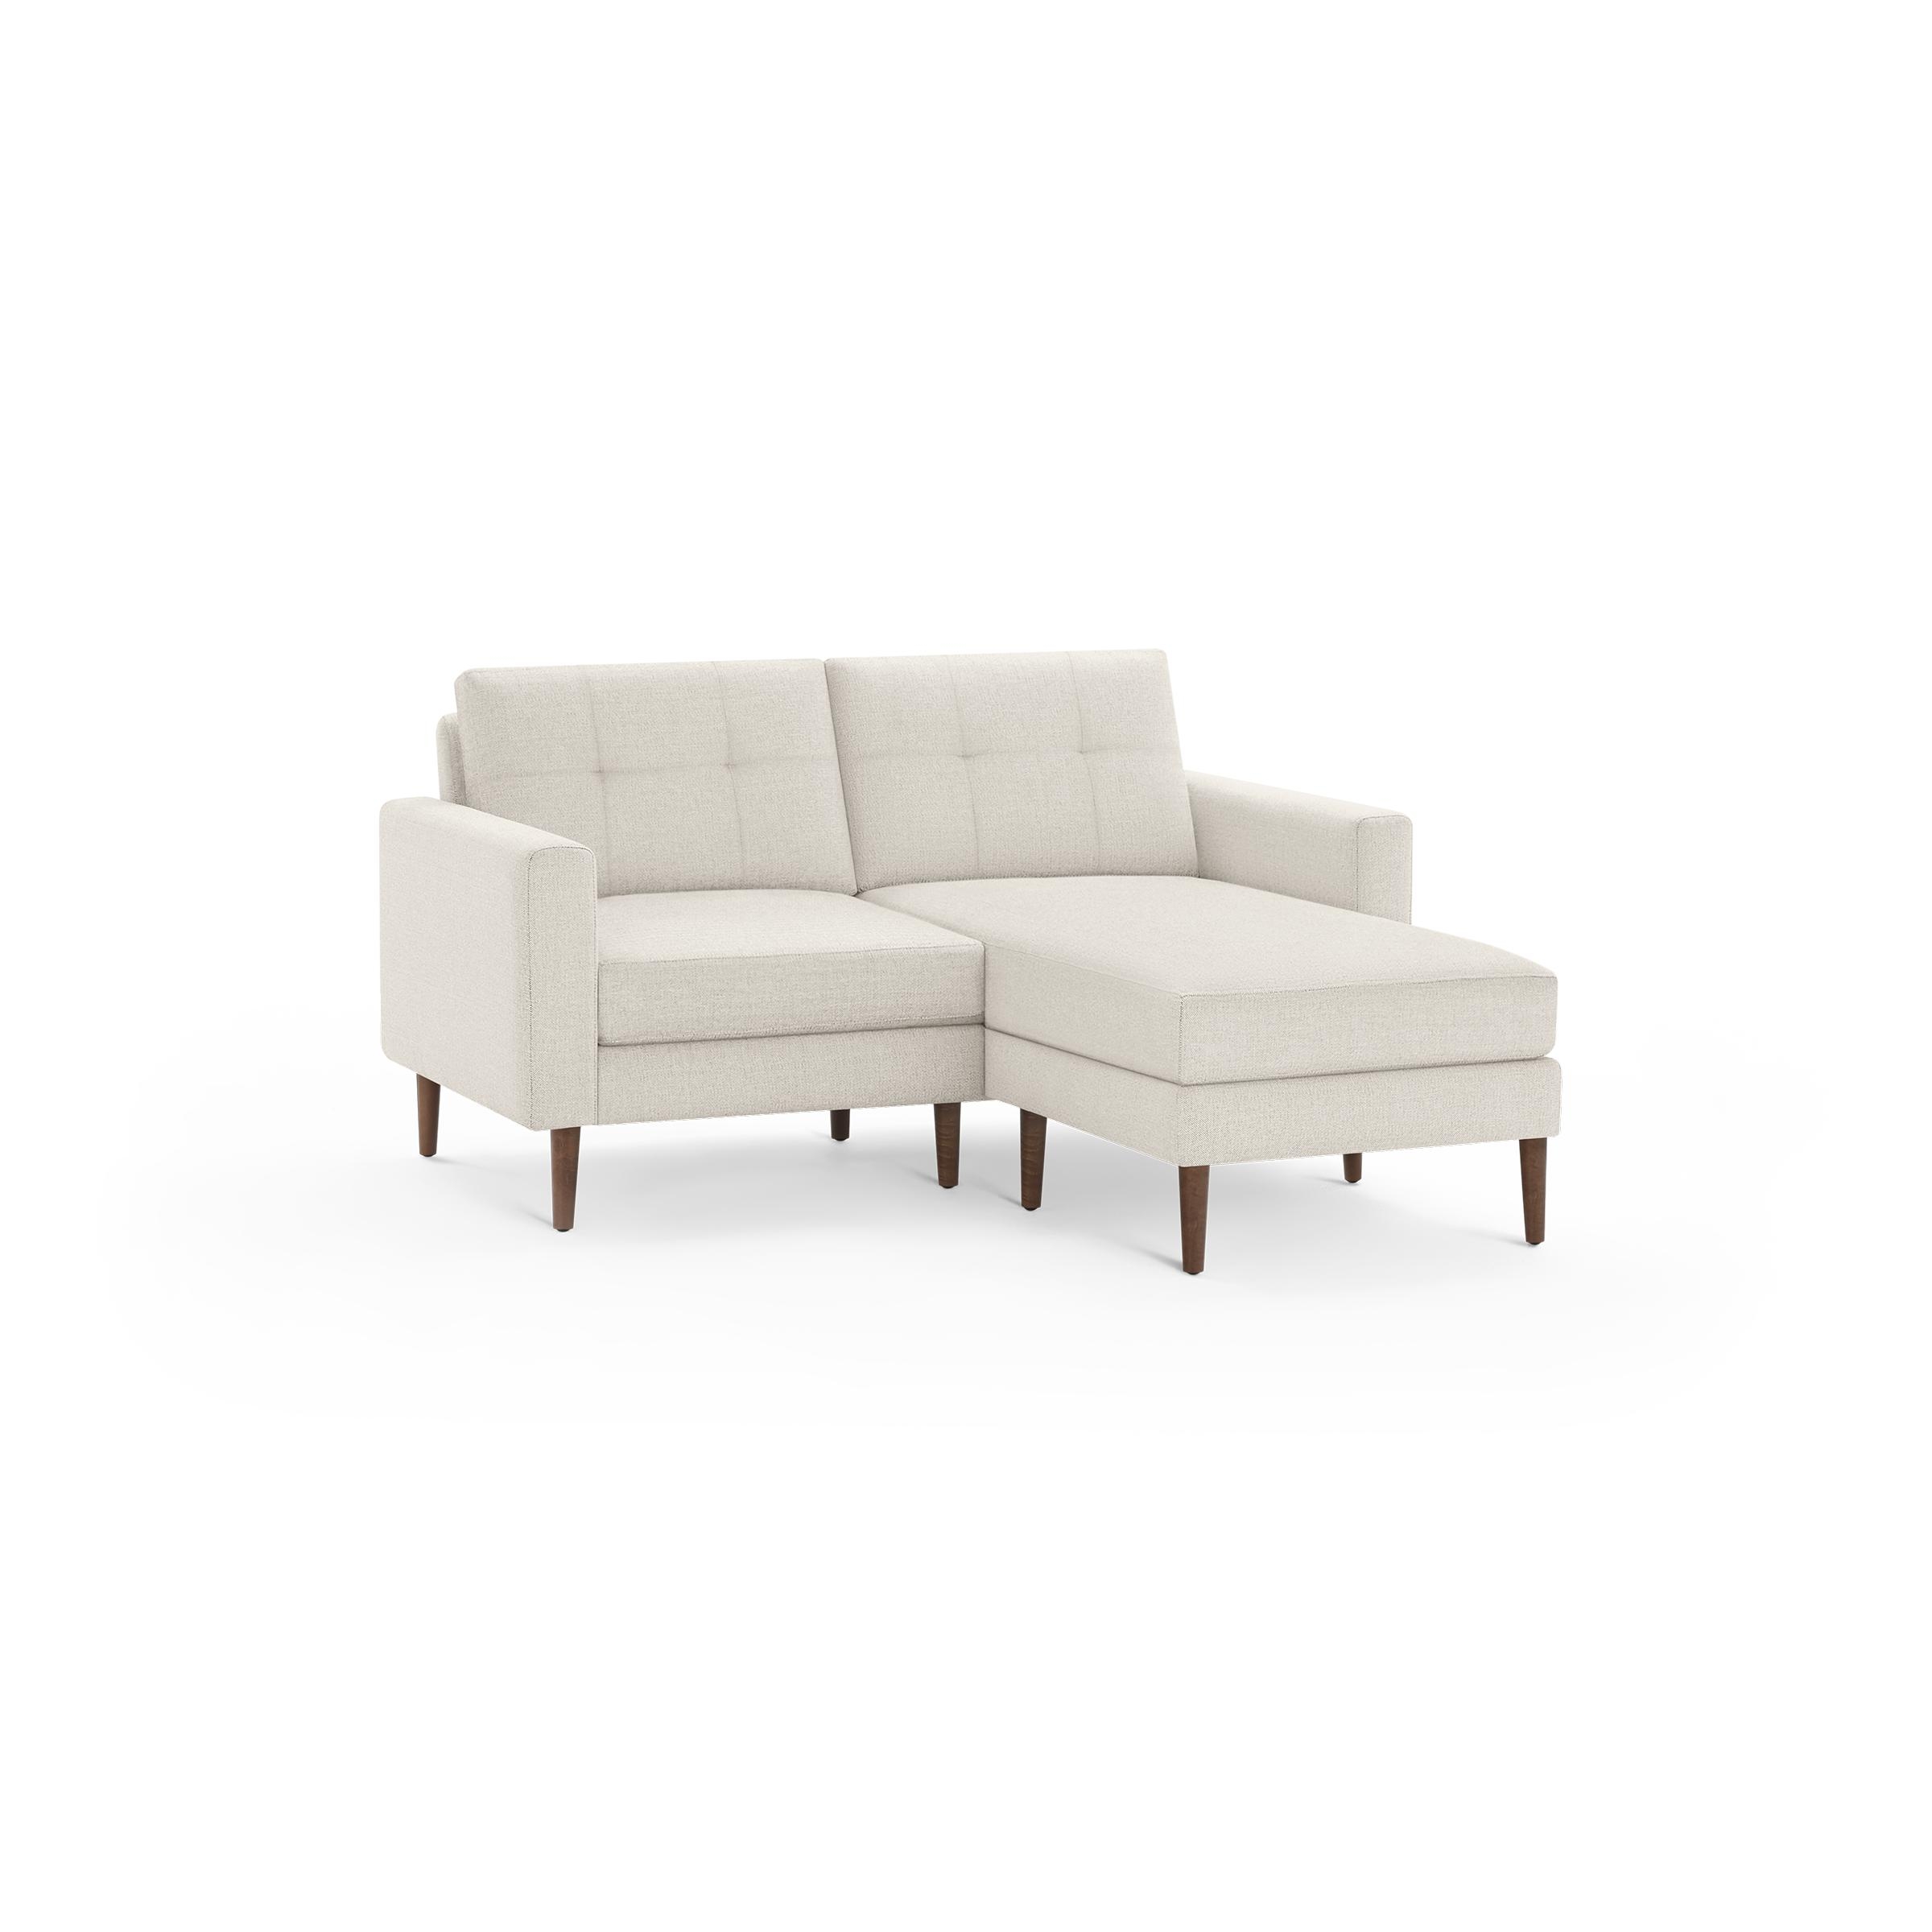 The Block Nomad Sectional Loveseat in Ivory, Walnut Legs - Image 1